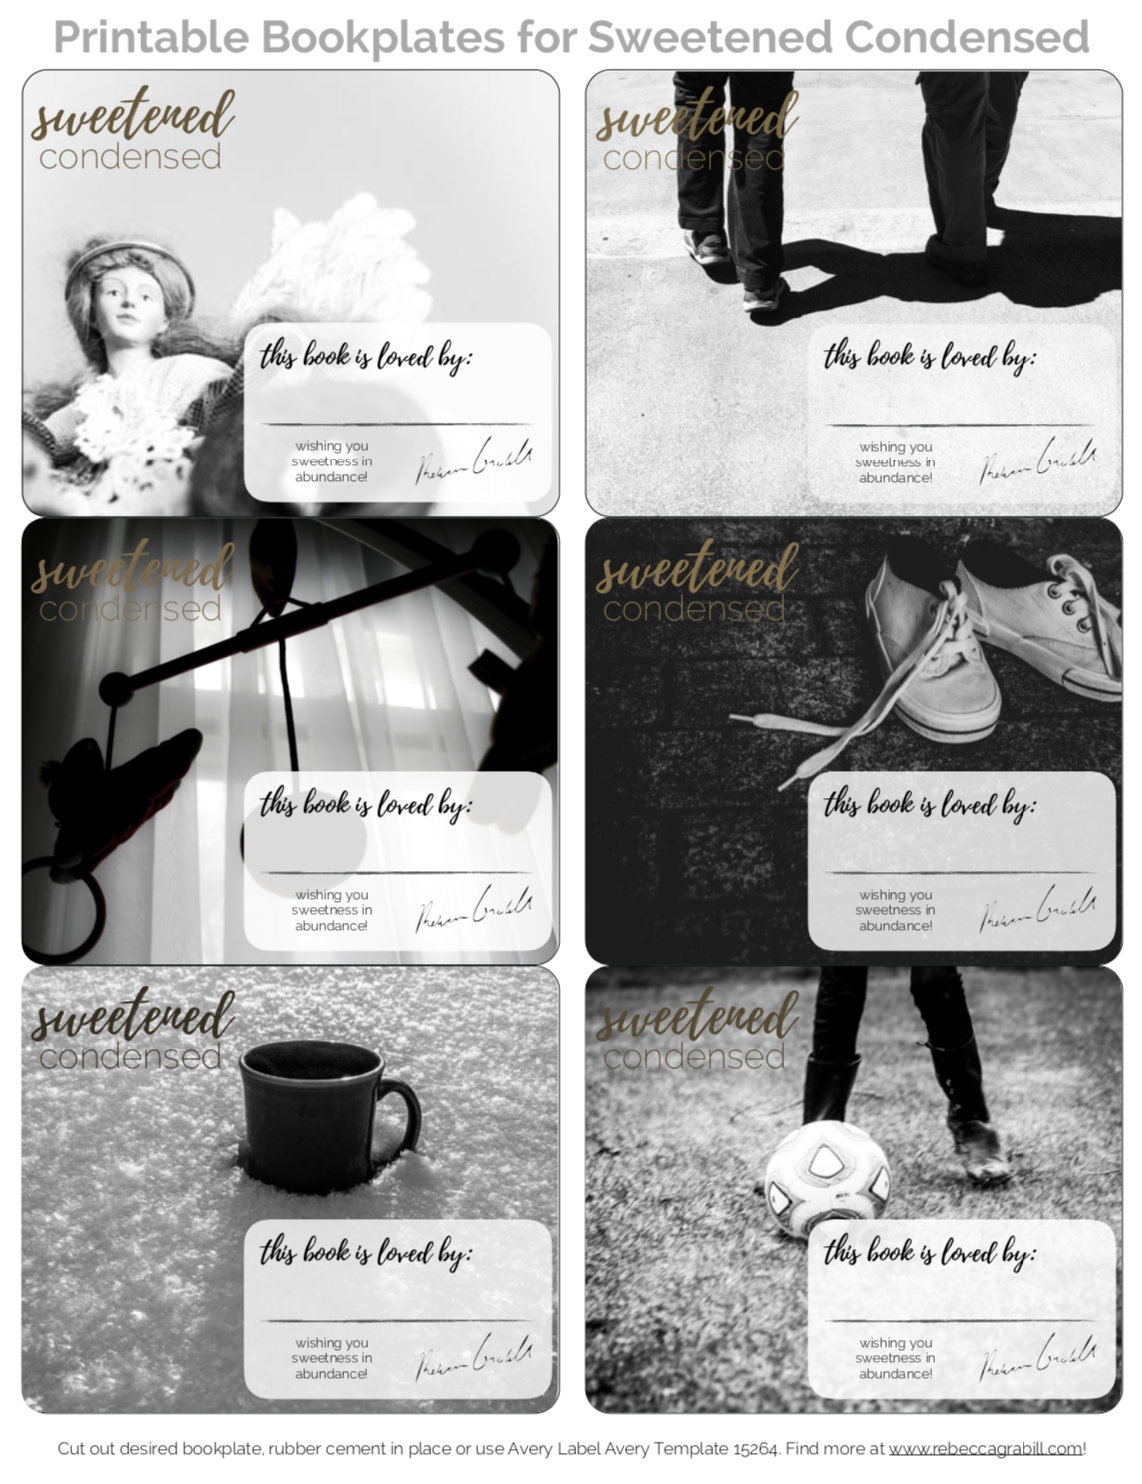 Sweetened Condensed Printable for Book Groups Book Plates